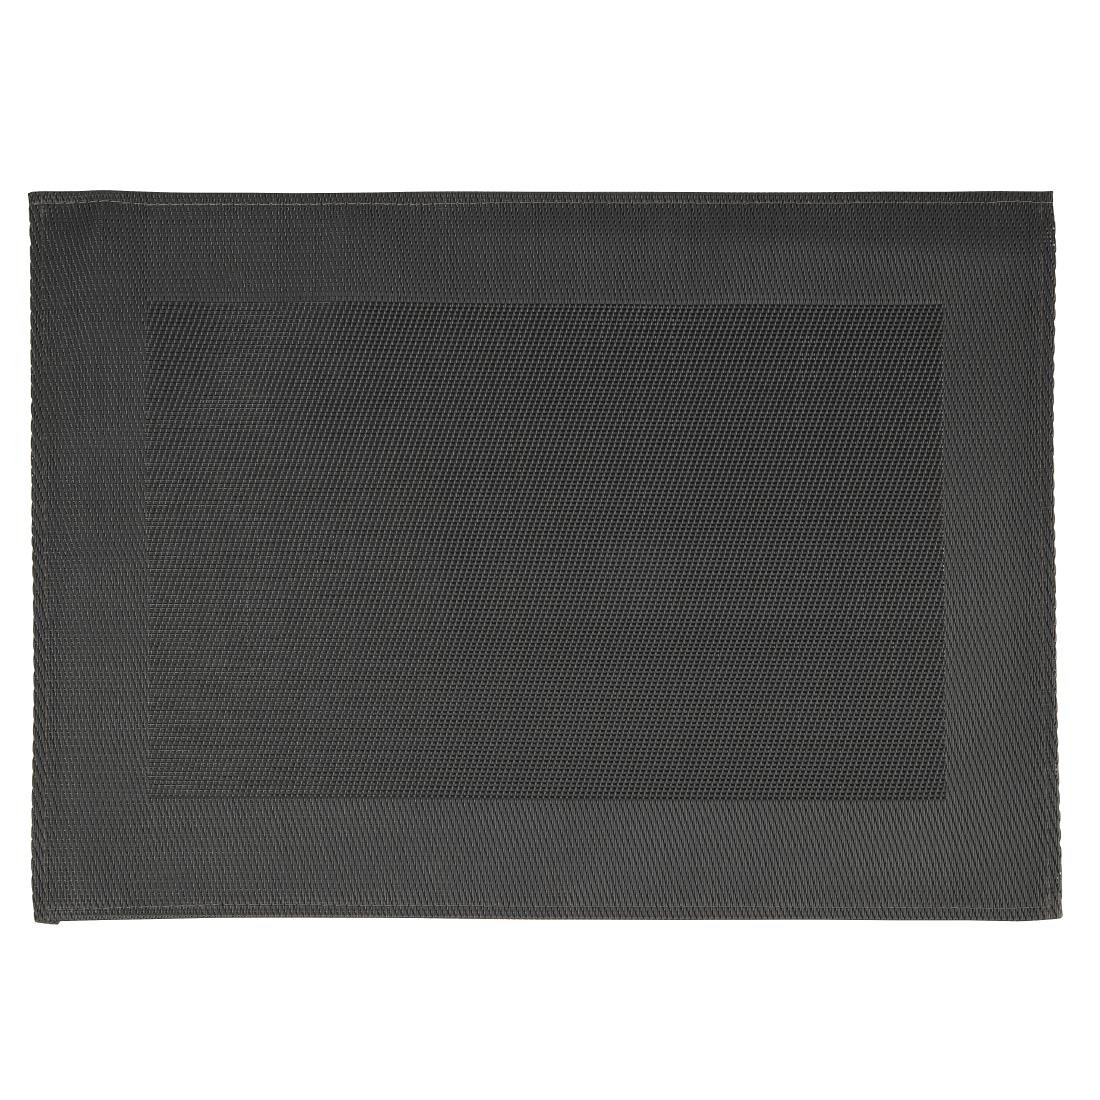 APS PVC Placemat Fine Band Frame Black (Pack of 6) JD Catering Equipment Solutions Ltd